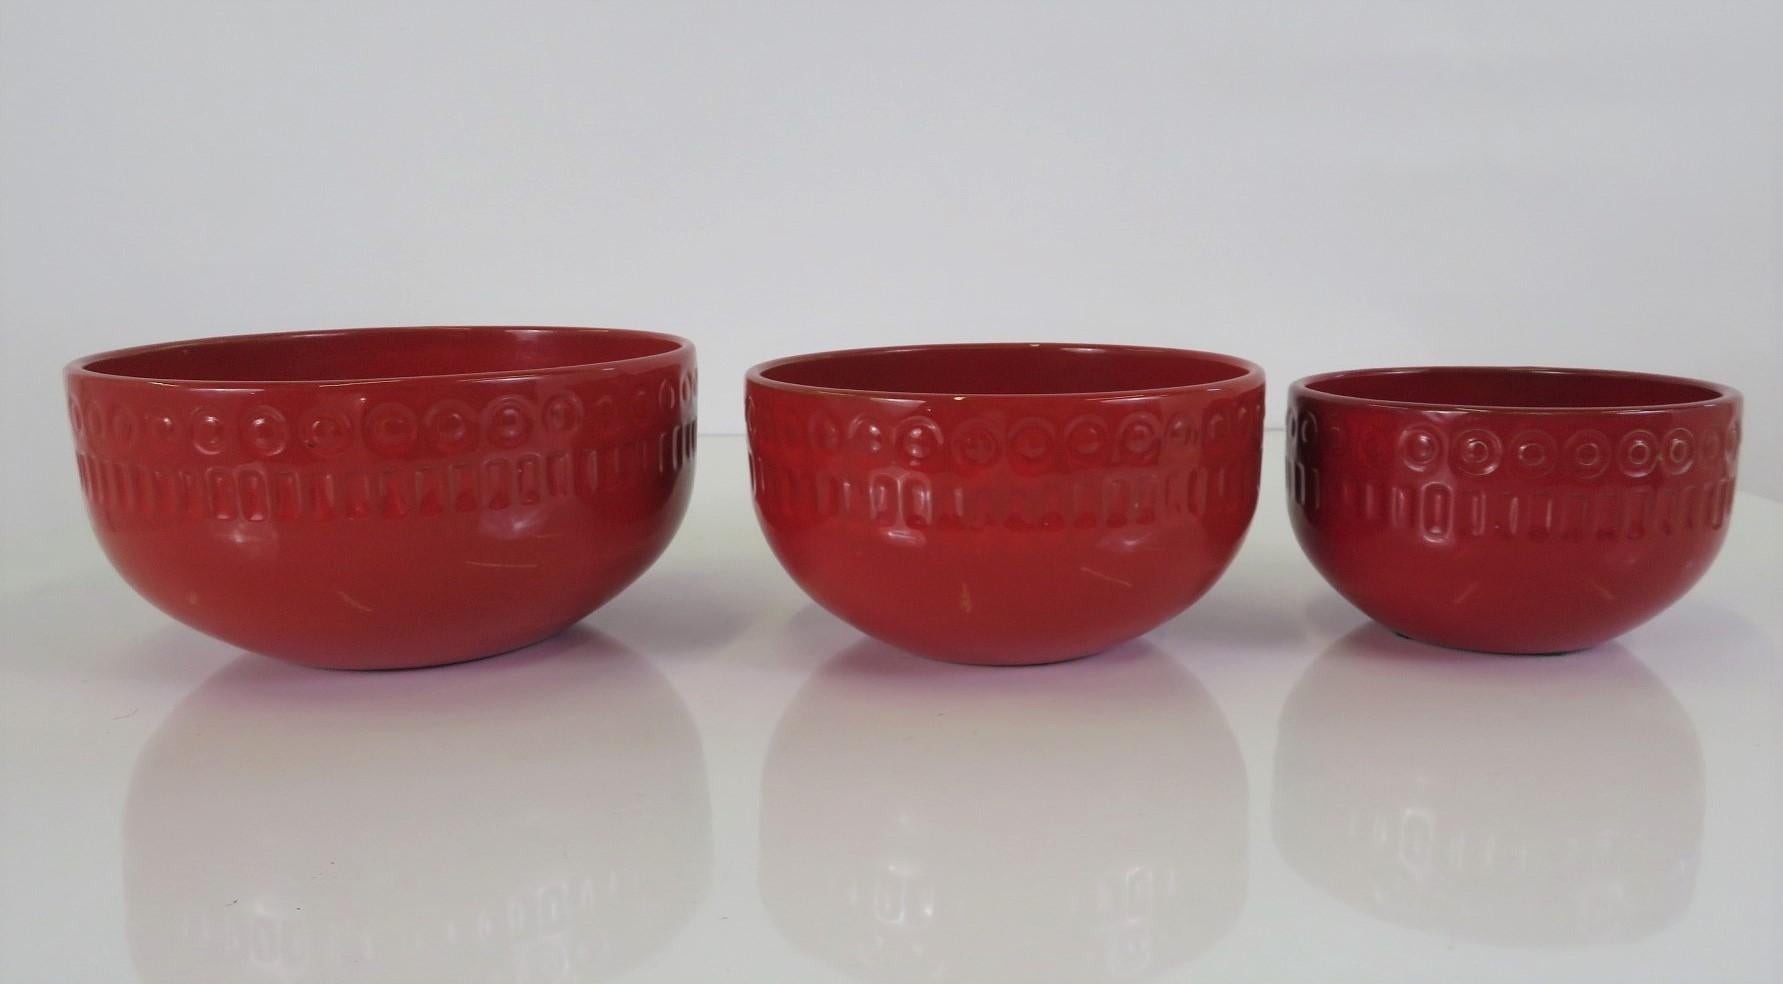 Mari Simmulson ( 1911 - 2007 ) for Upsala - Ekeby, Sweden, a set of nesting ceramic bowls. These tomato red utilitarian bowls are decorated with a band of an incised pattern of circles and vertical lines around their tops and center. These pieces